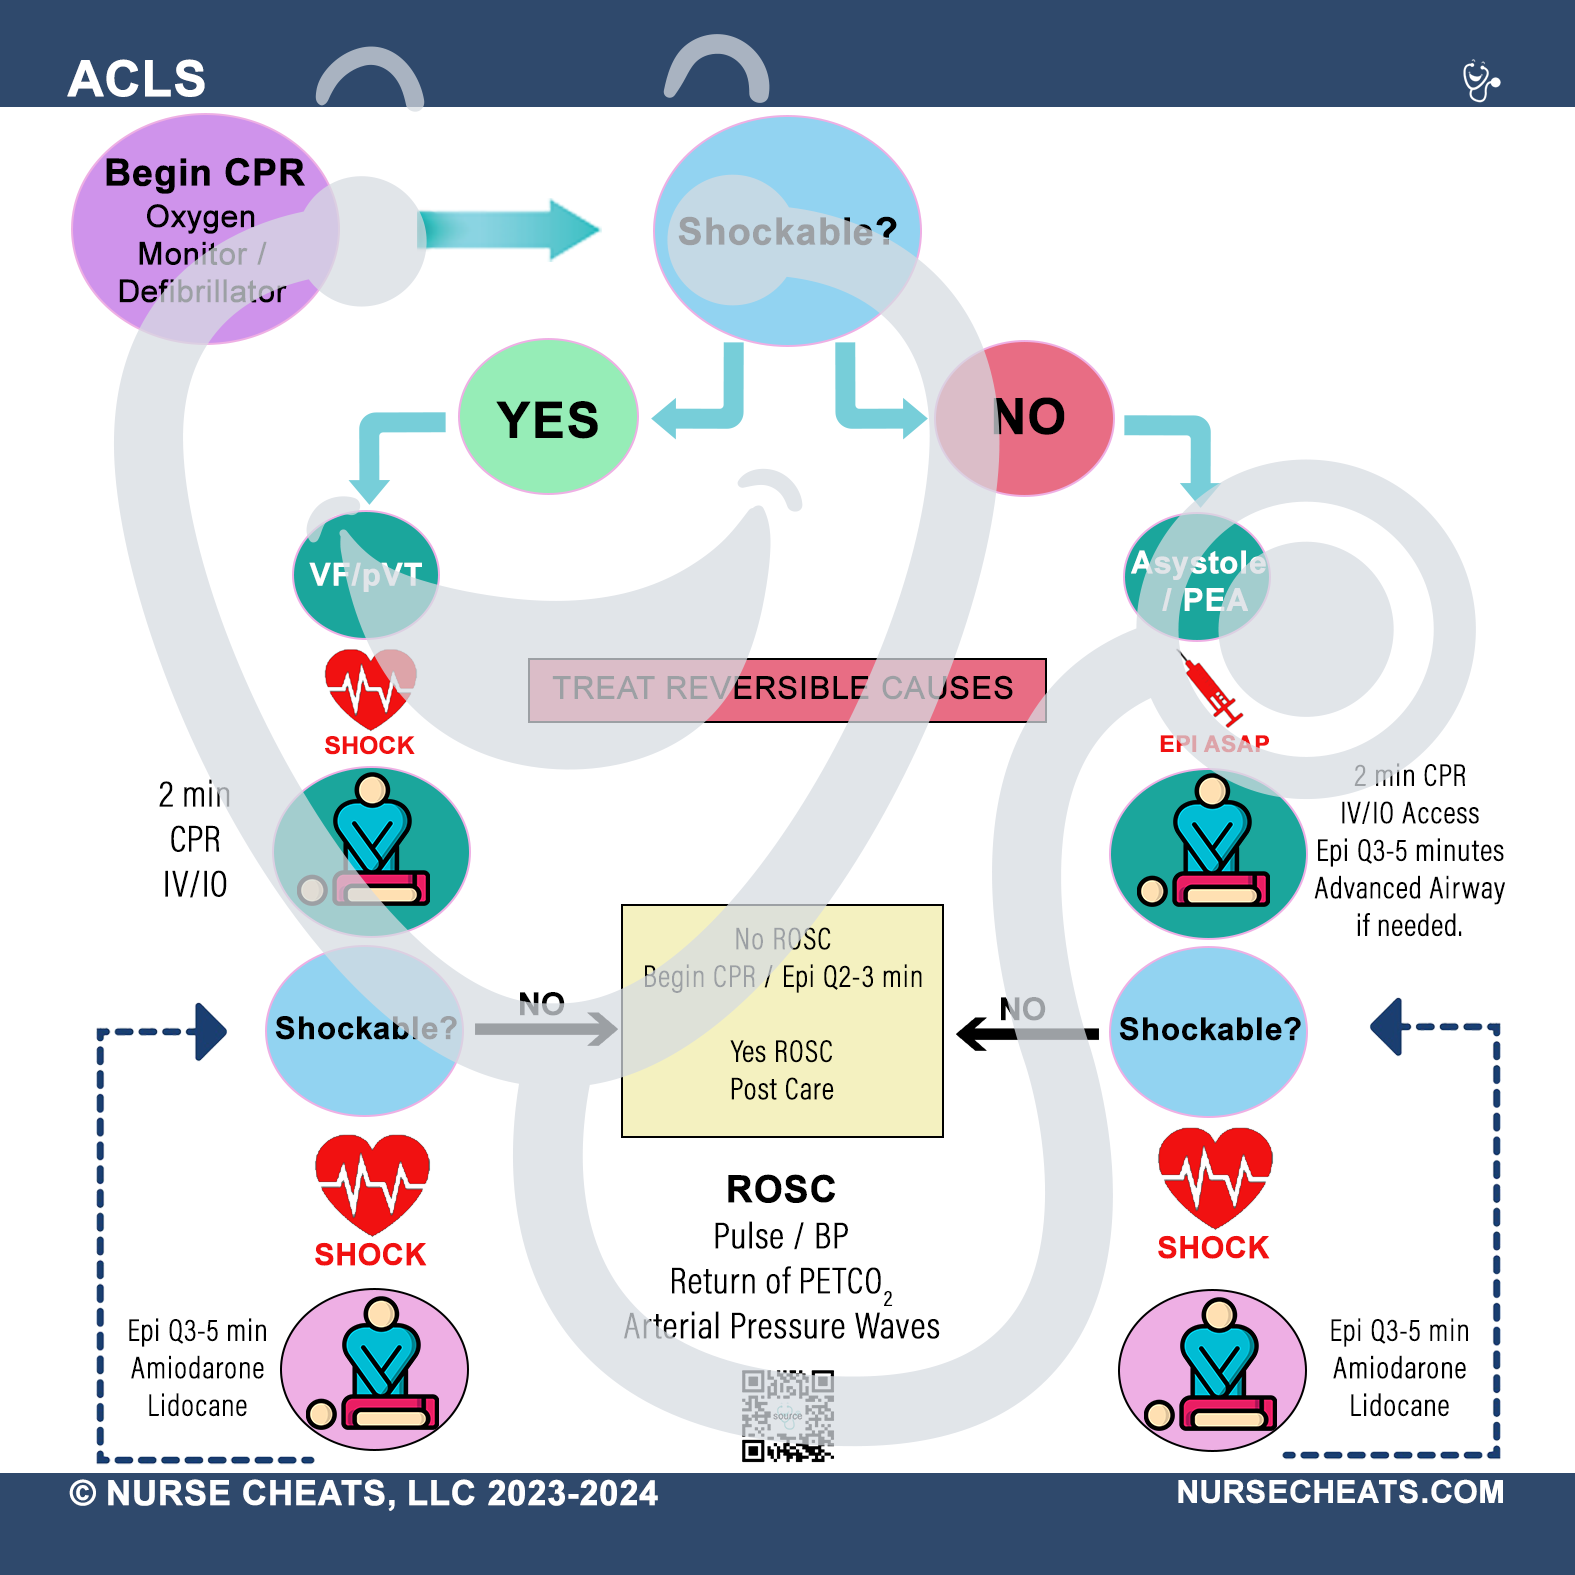 This badge is the algorithm for ACLS (Advanced Cardiovascular Life Support). It also contains emergency medication doses, CPR (cardiopulmonary resuscitation) ratios,&nbsp; AED (<span data-mce-fragment="1">Automated external defibrillator</span>) operation instructions, and joule settings. This is a MUST-HAVE for nurses.